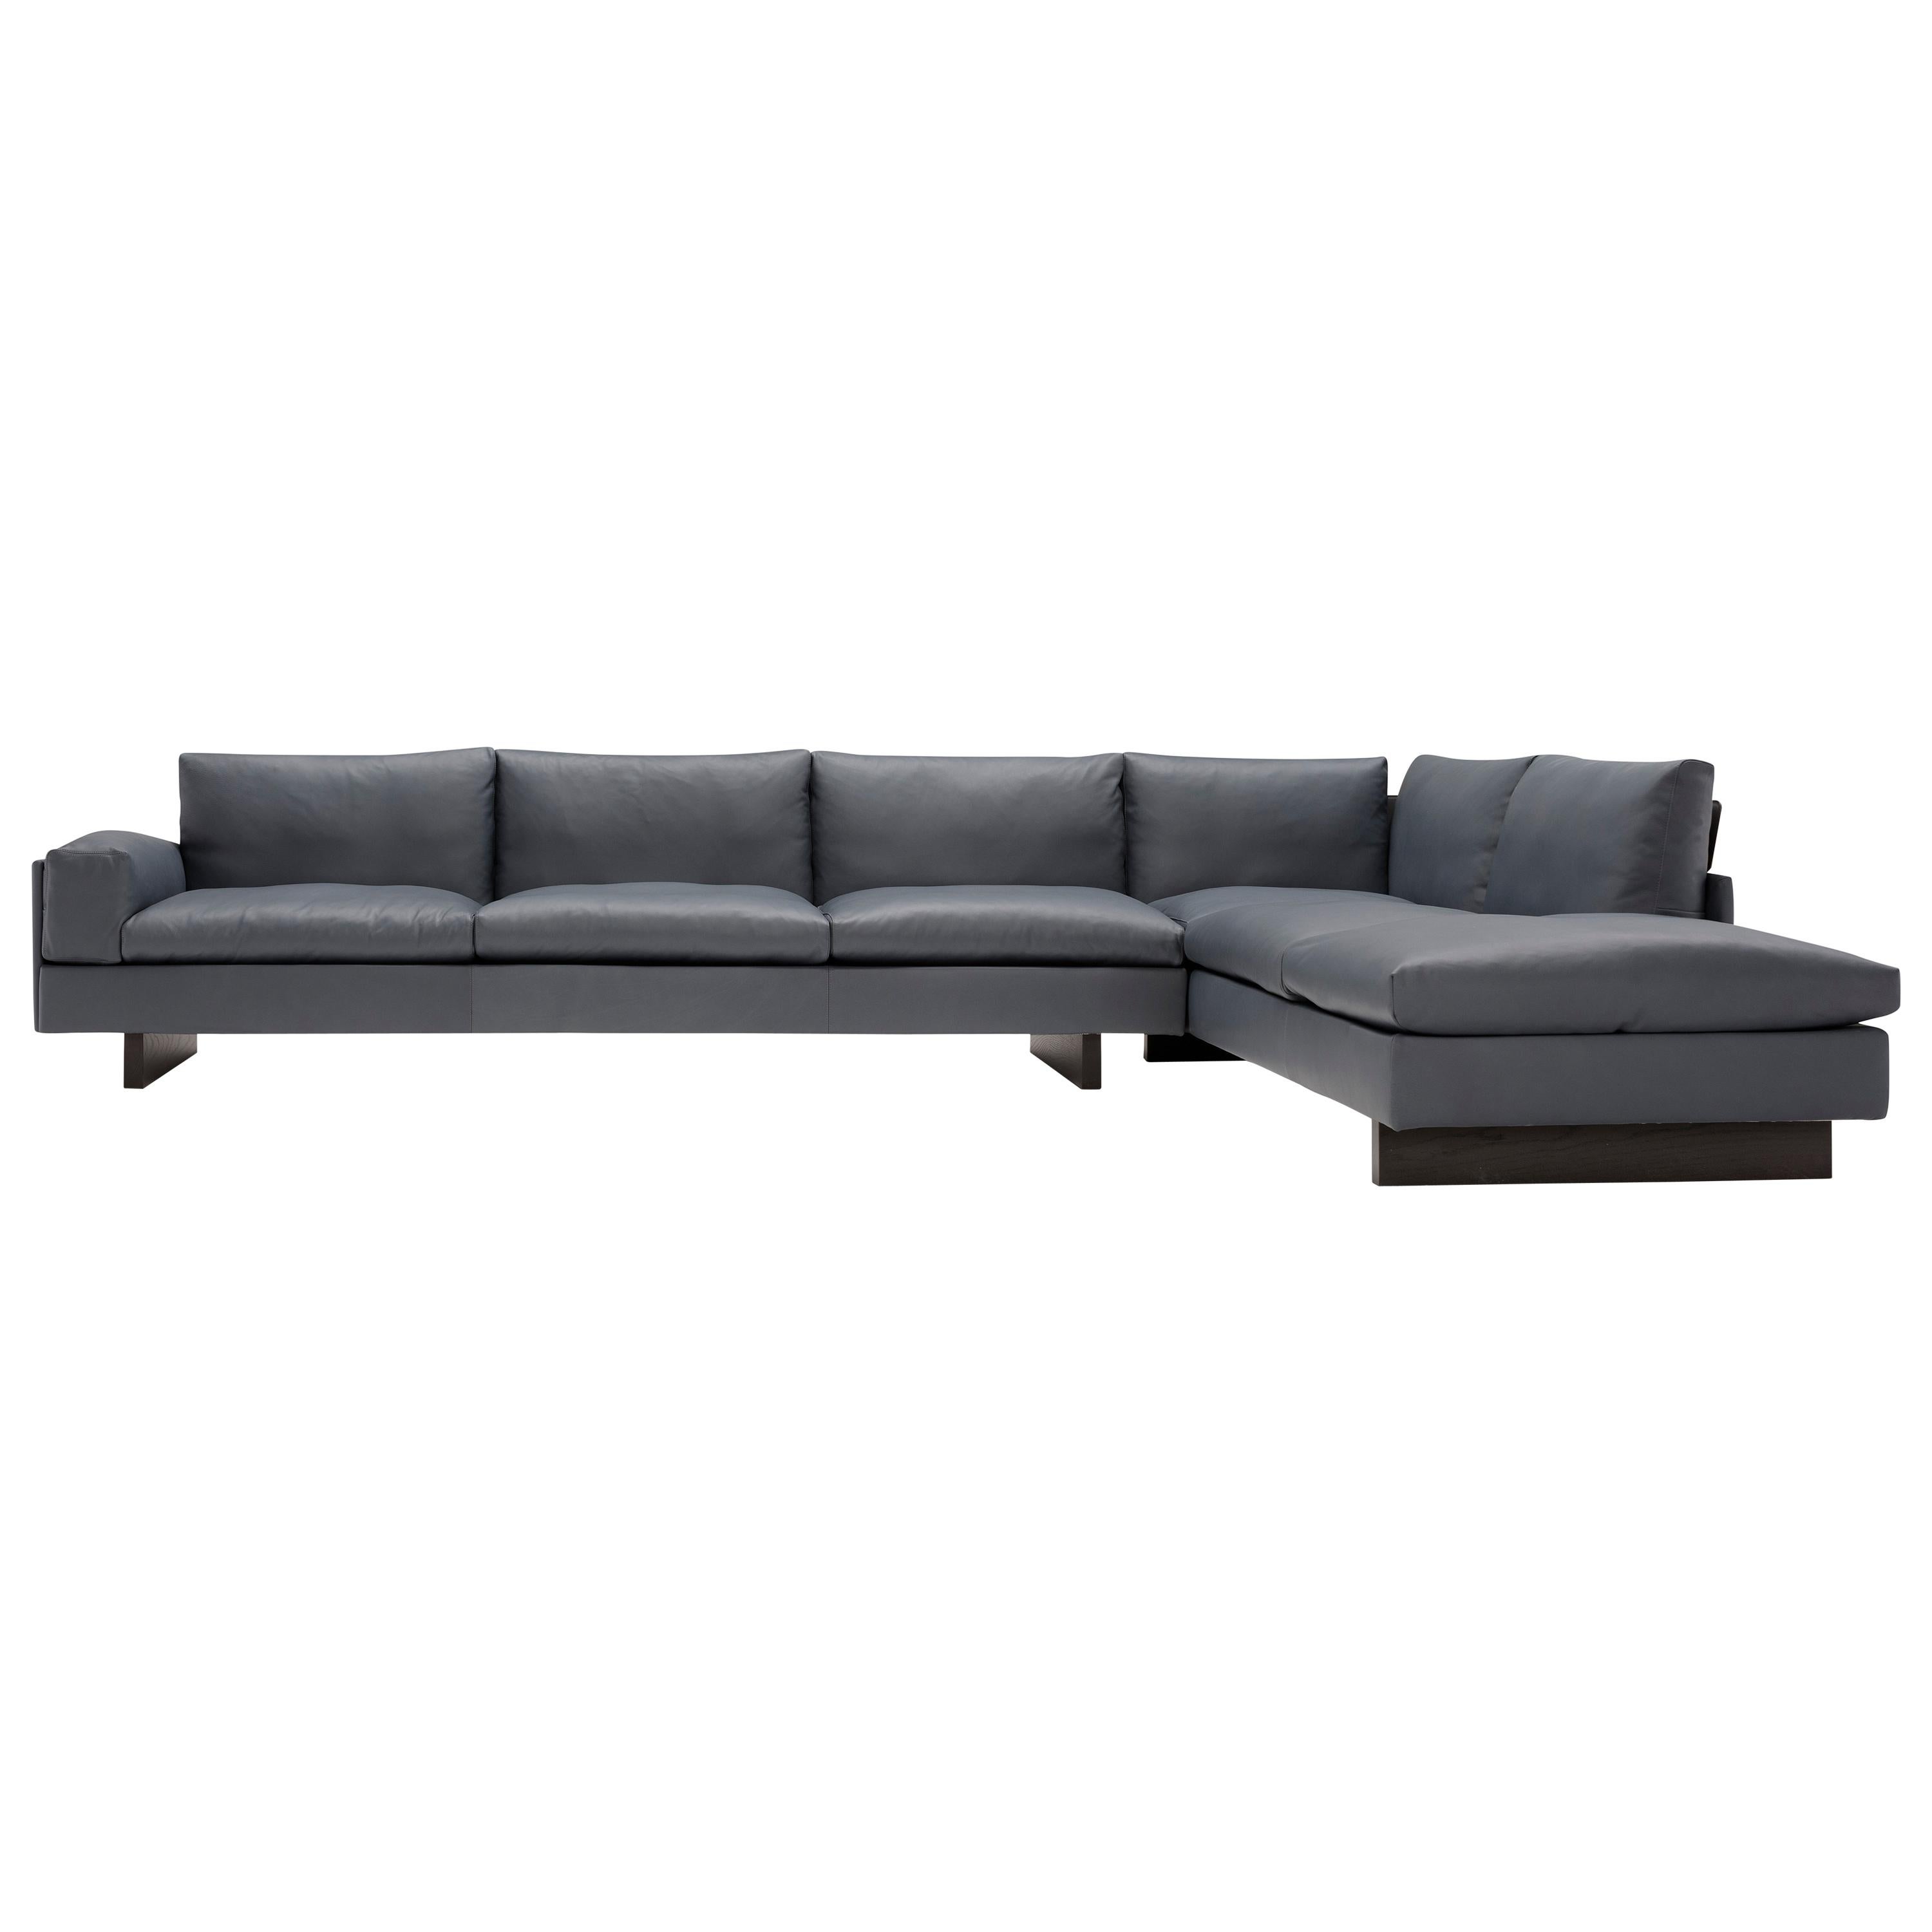 Amura 'Tau' Sectional Sofa in Grey Leather by Emanuel Gargano For Sale